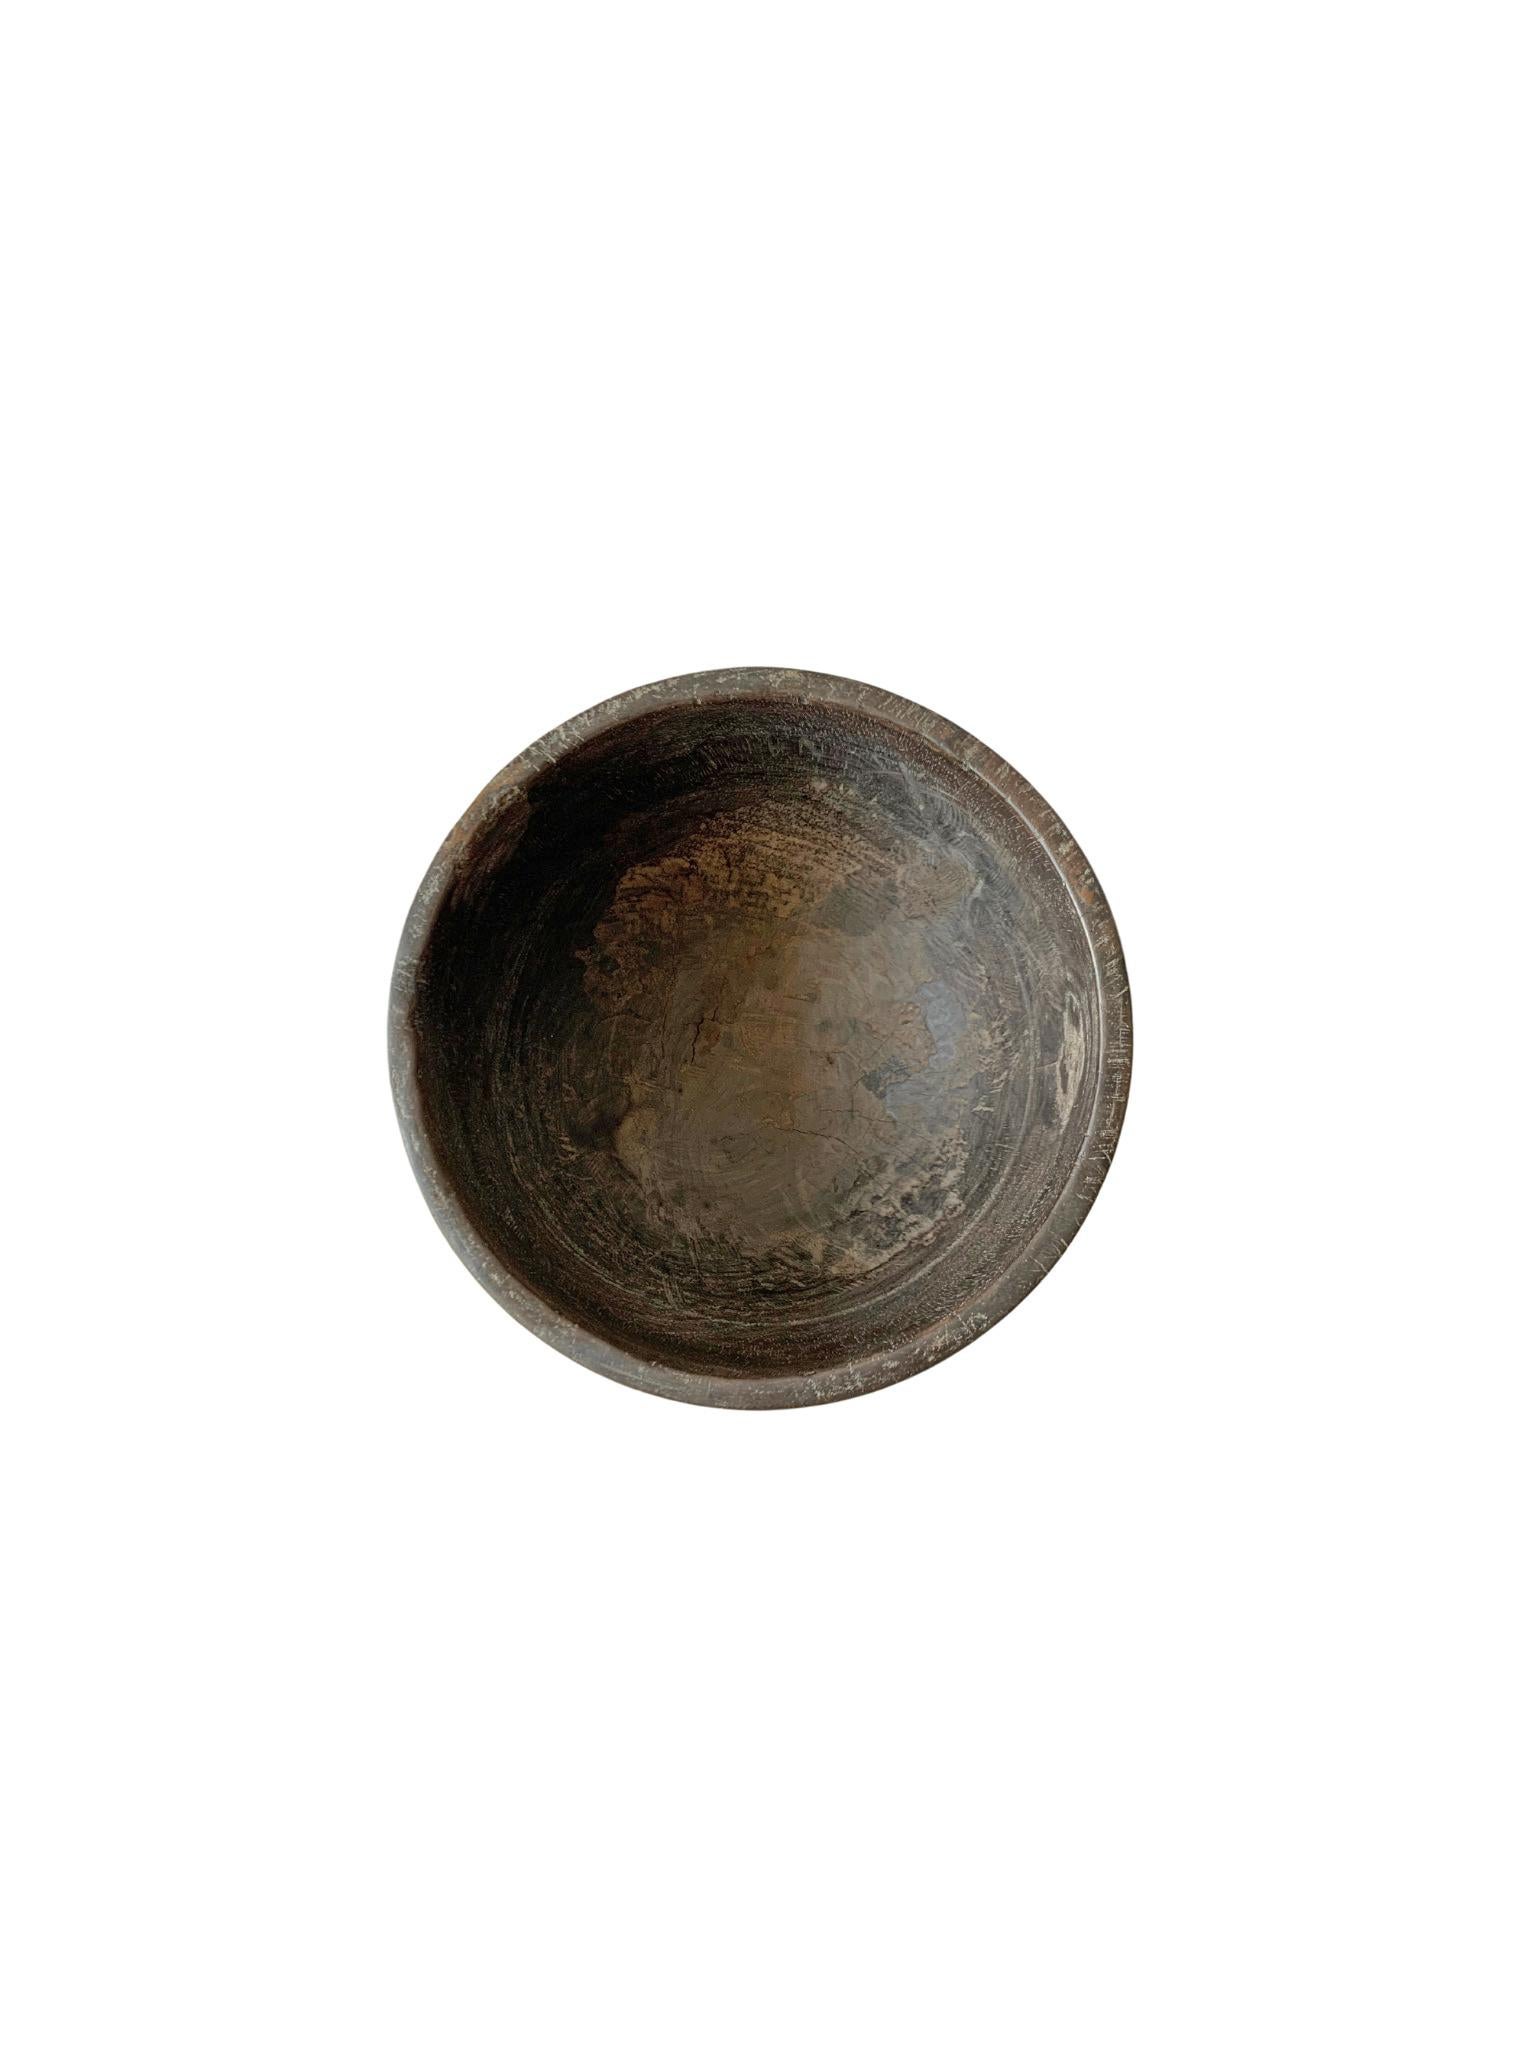 Other Fruitwood Bowl from Timor Island, Indonesia, Early 20th Century For Sale